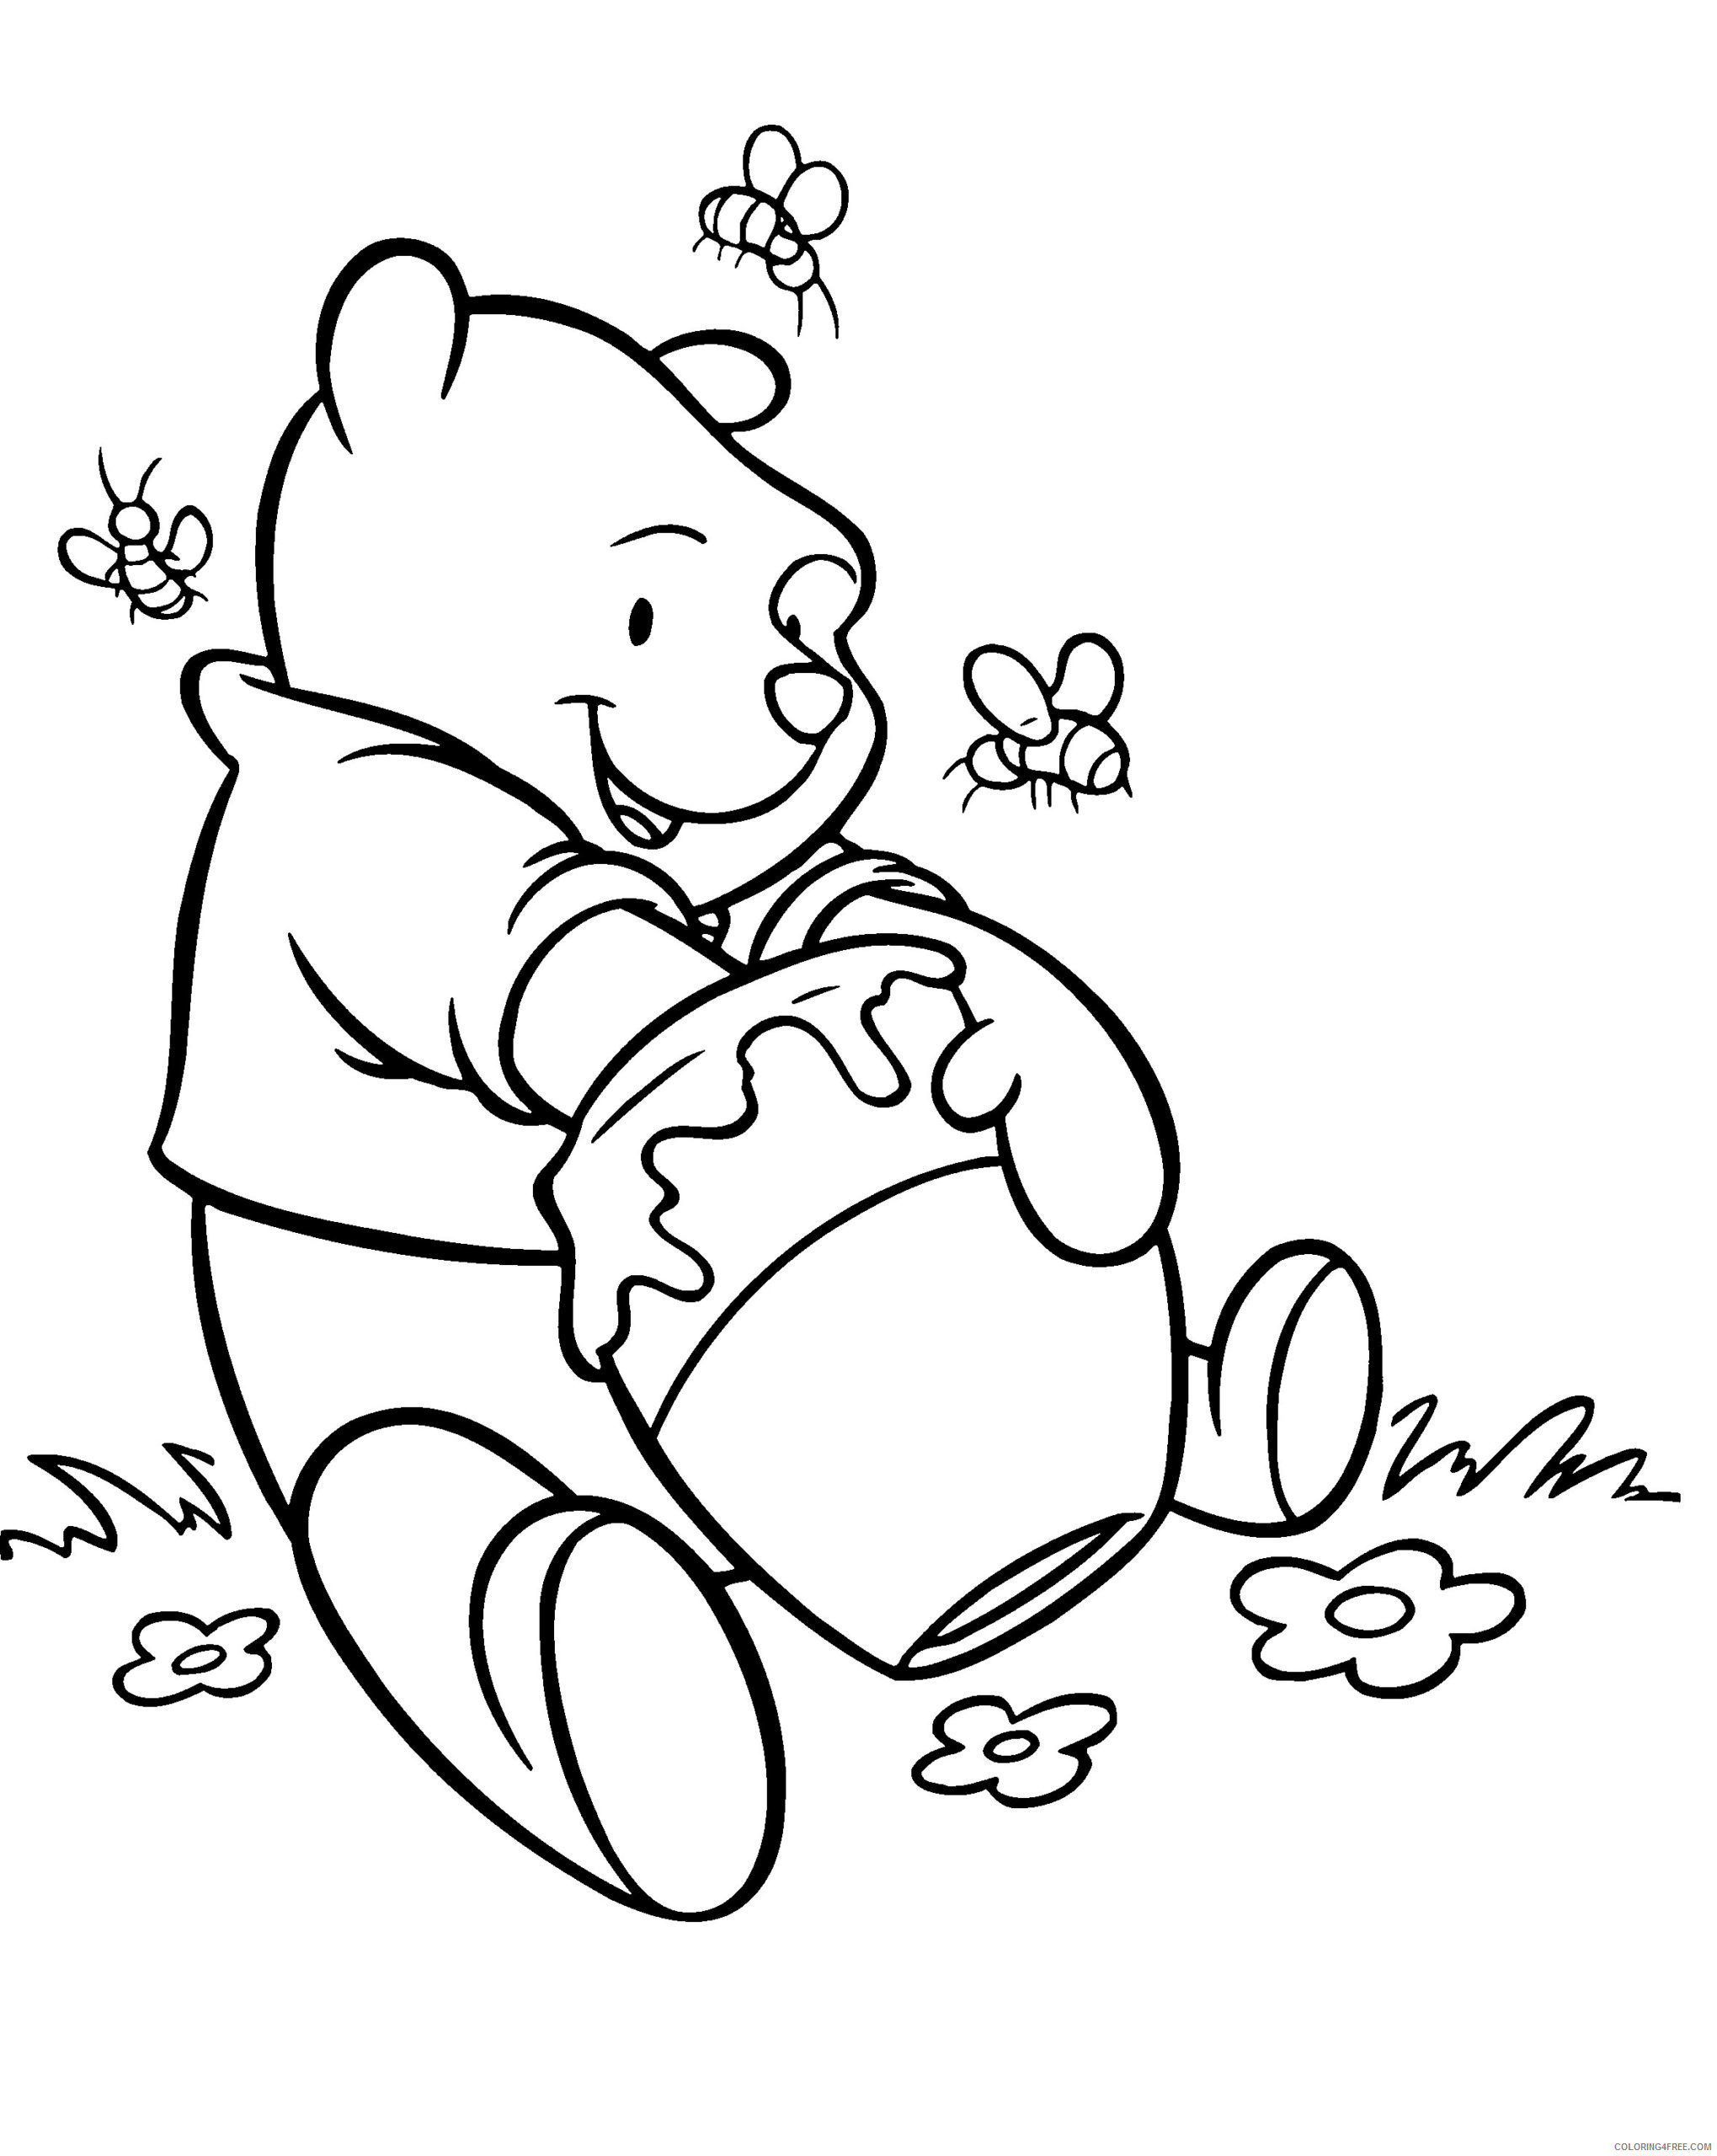 Winnie the Pooh Coloring Pages Cartoons Free Winnie The Pooh Printable 2020 6961 Coloring4free